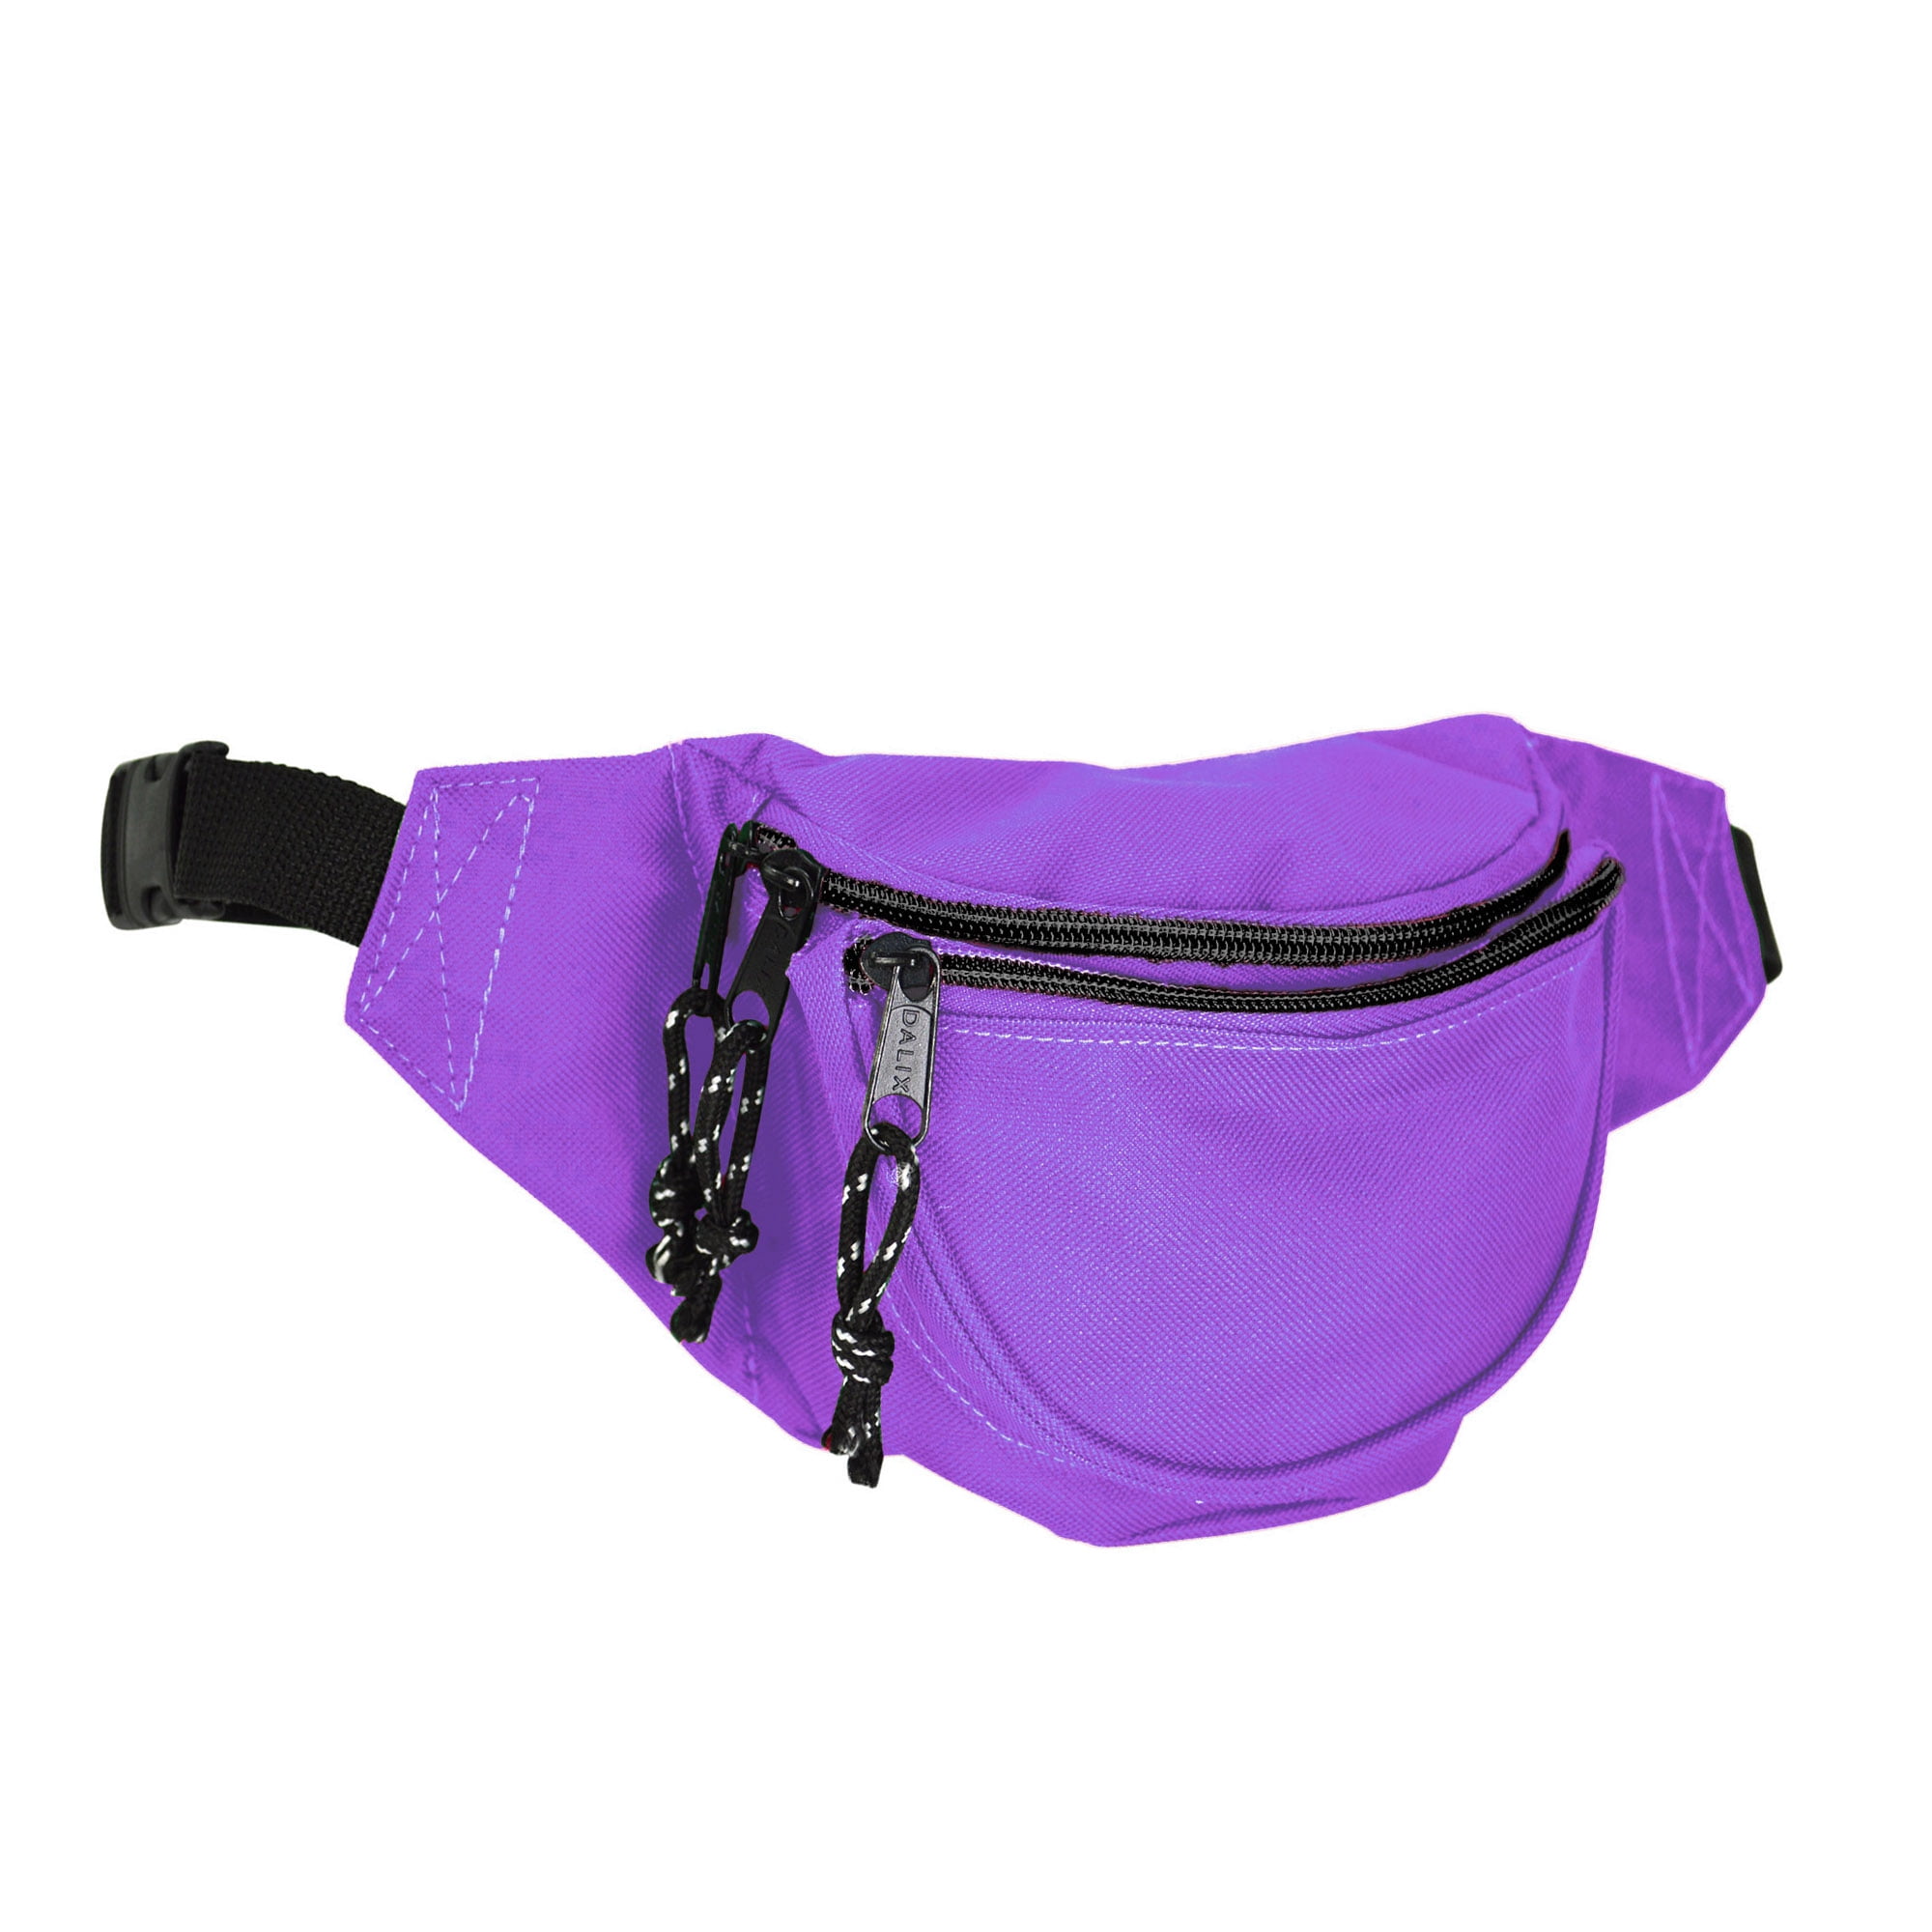 DALIX Small Fanny Pack Waist Pouch S XS Size 24 to 31 in Purple ...